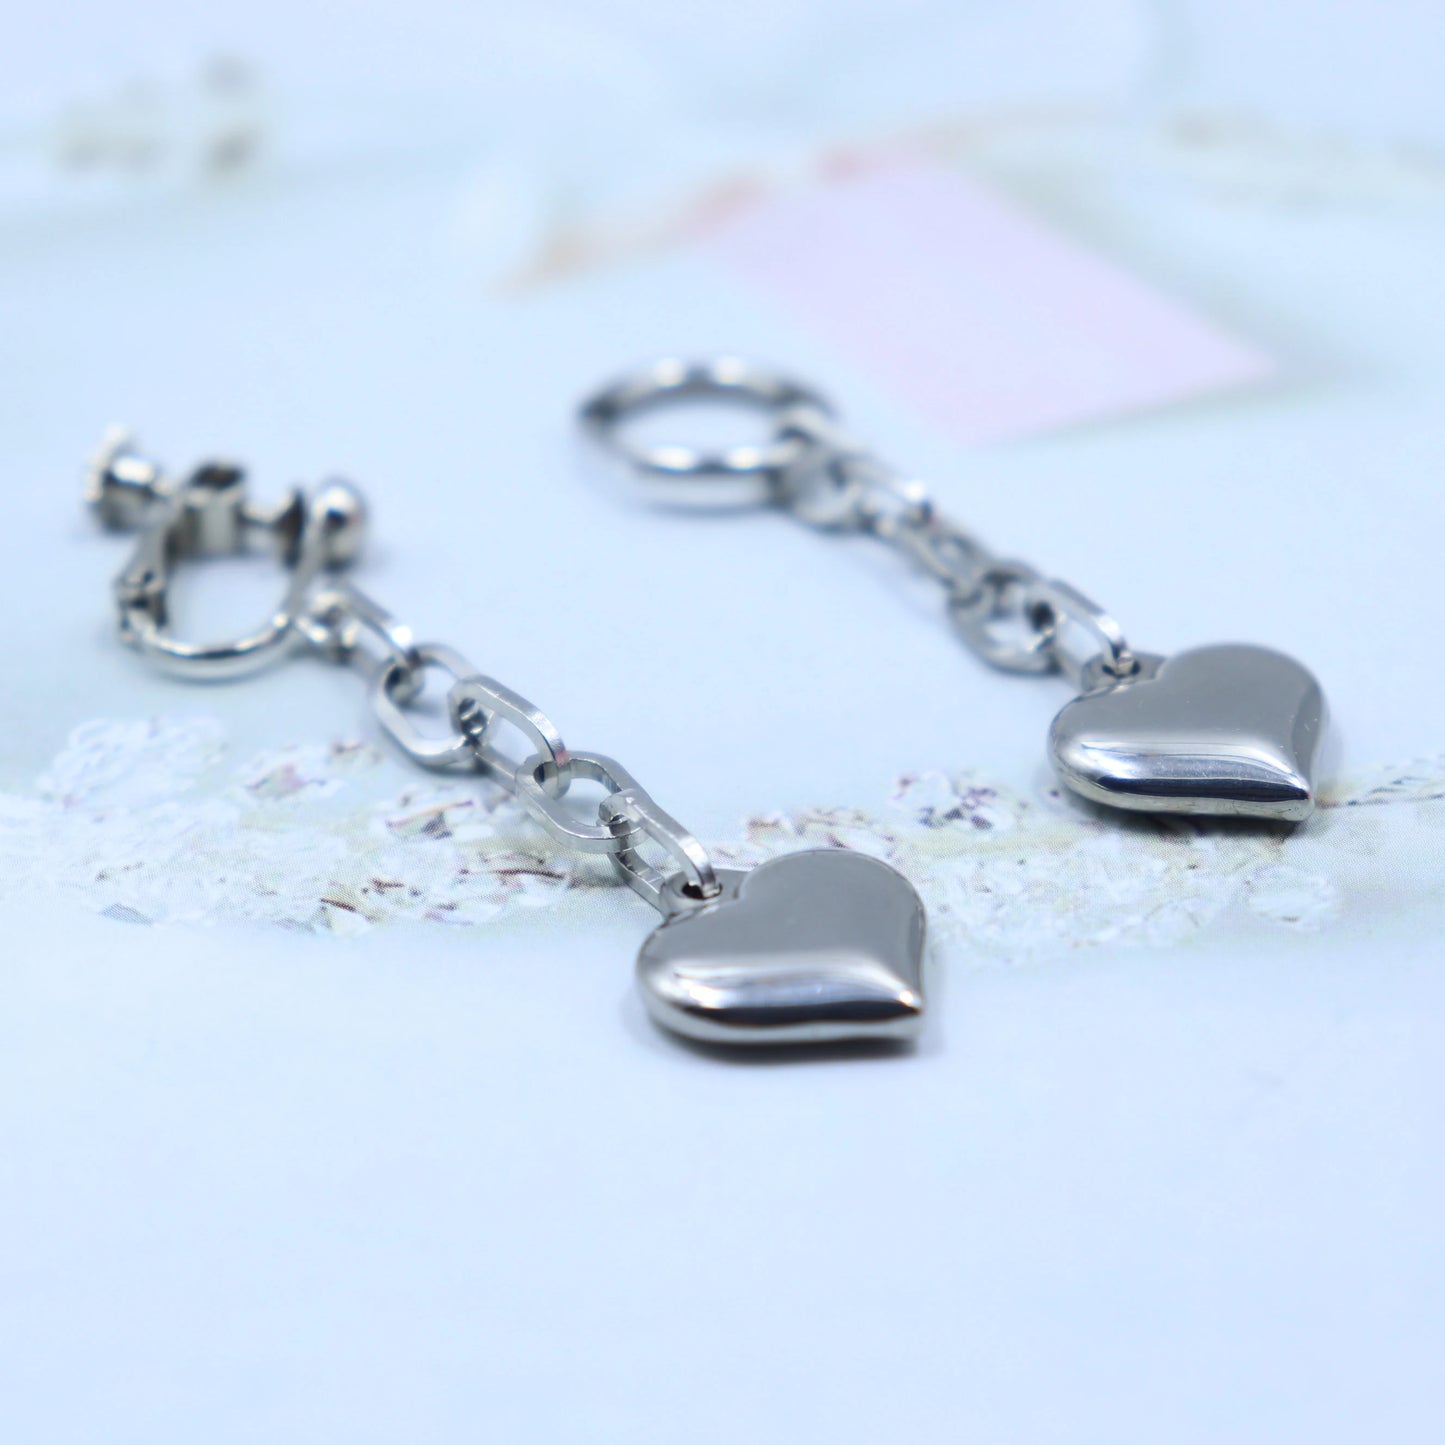 Sinister Chic: Death Note Ryuuku Heart Earrings – Edgy Anime-Inspired Ear Clips